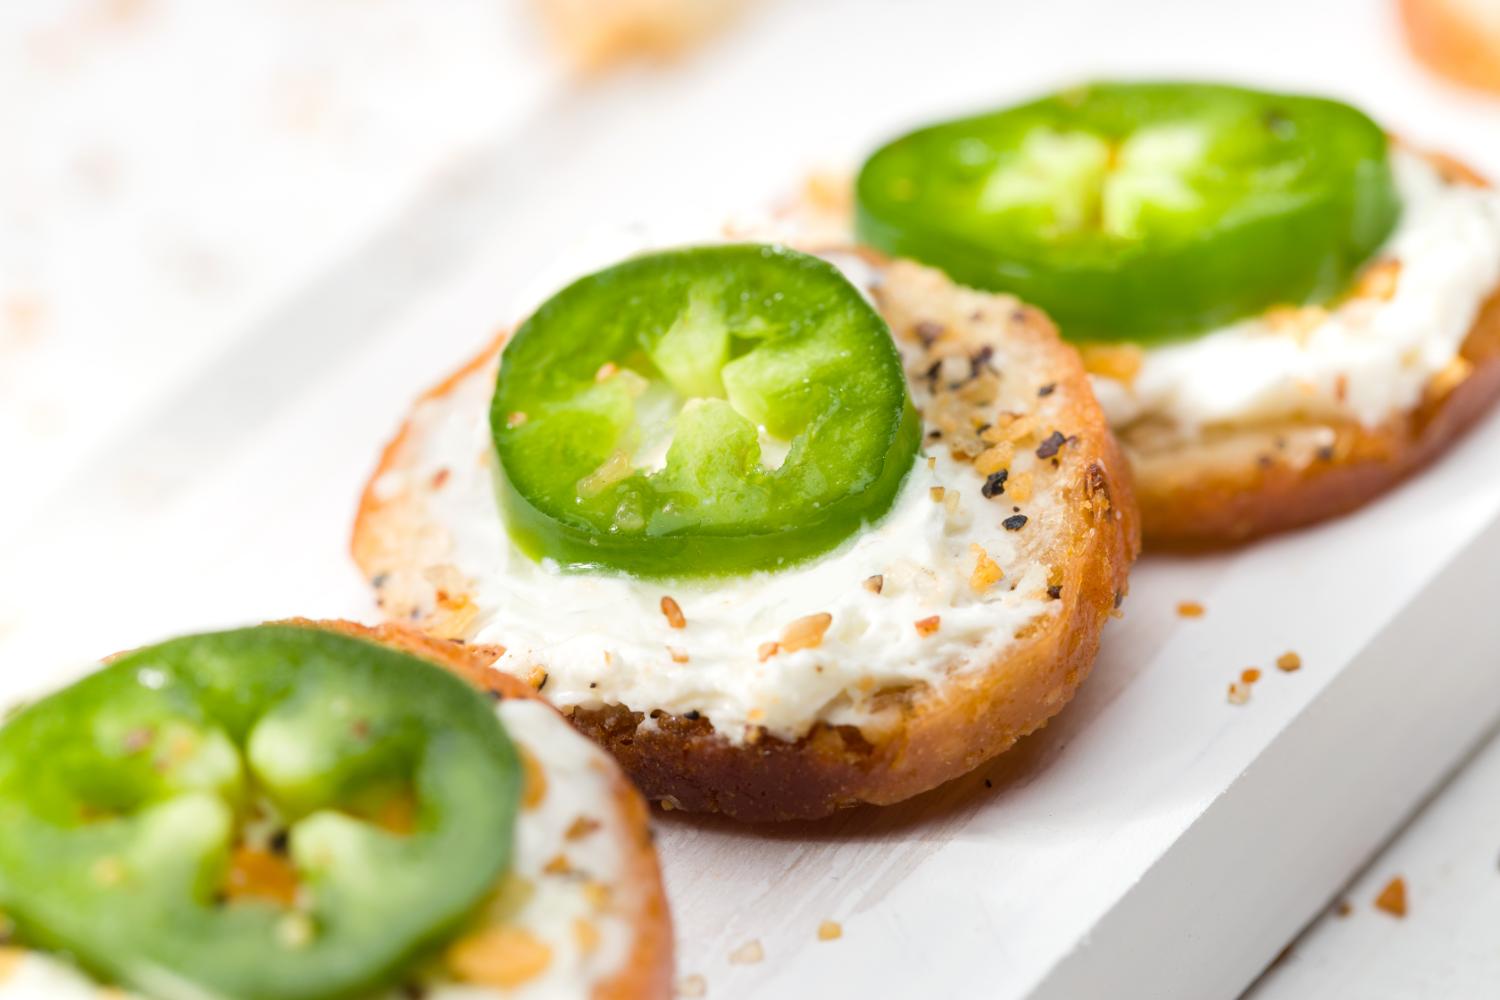 Everything Bagel Chips topped with sour cream and a jalapeño